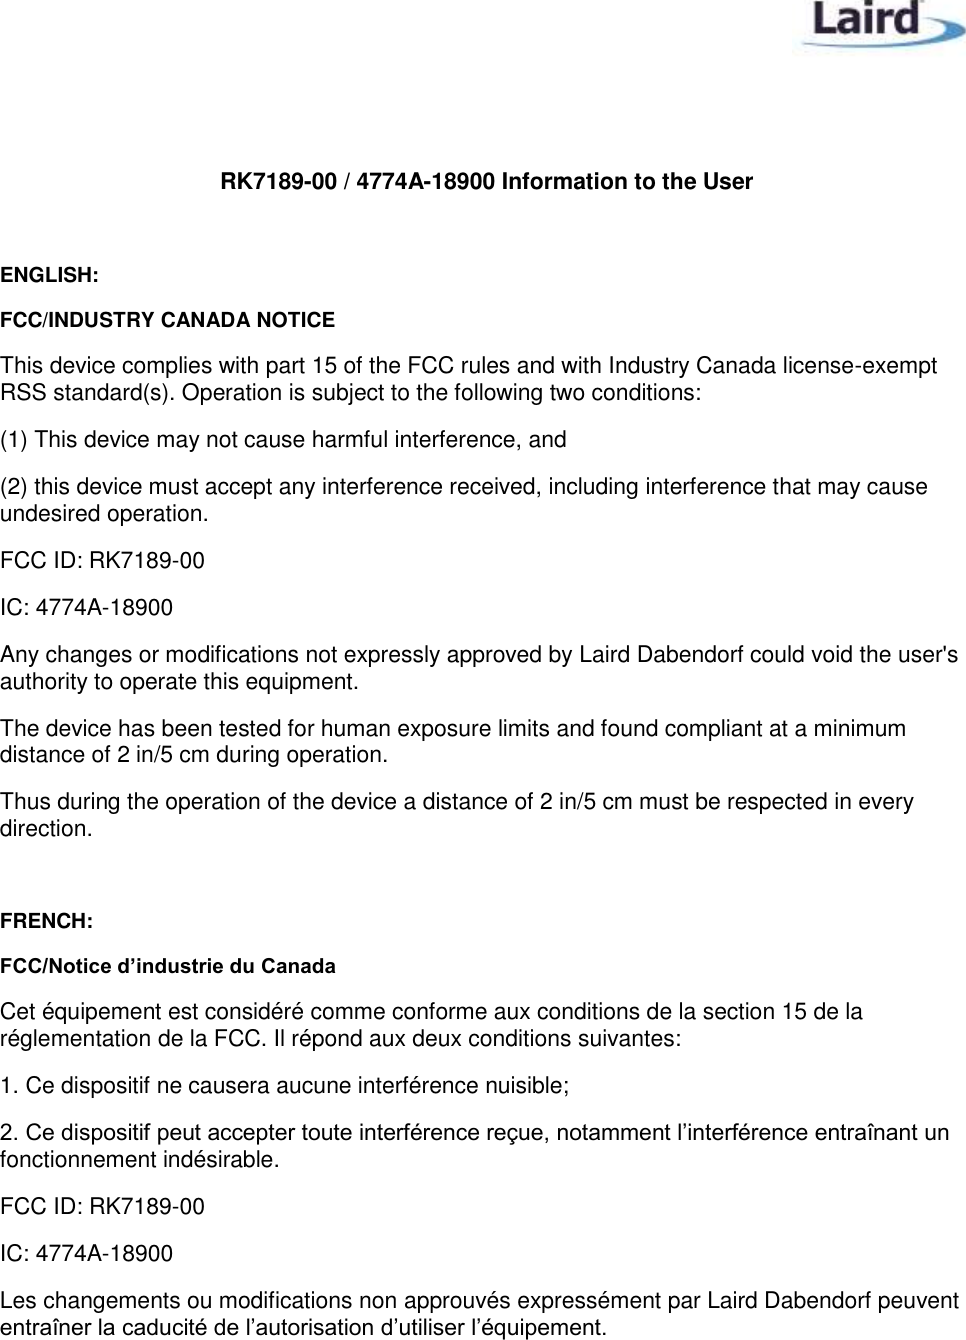    RK7189-00 / 4774A-18900 Information to the User  ENGLISH: FCC/INDUSTRY CANADA NOTICE This device complies with part 15 of the FCC rules and with Industry Canada license-exempt RSS standard(s). Operation is subject to the following two conditions: (1) This device may not cause harmful interference, and (2) this device must accept any interference received, including interference that may cause undesired operation. FCC ID: RK7189-00 IC: 4774A-18900 Any changes or modifications not expressly approved by Laird Dabendorf could void the user&apos;s authority to operate this equipment. The device has been tested for human exposure limits and found compliant at a minimum distance of 2 in/5 cm during operation. Thus during the operation of the device a distance of 2 in/5 cm must be respected in every direction.  FRENCH: FCC/Notice d’industrie du Canada Cet équipement est considéré comme conforme aux conditions de la section 15 de la réglementation de la FCC. Il répond aux deux conditions suivantes: 1. Ce dispositif ne causera aucune interférence nuisible; 2. Ce dispositif peut accepter toute interférence reçue, notamment l’interférence entraînant un fonctionnement indésirable. FCC ID: RK7189-00 IC: 4774A-18900 Les changements ou modifications non approuvés expressément par Laird Dabendorf peuvent entraîner la caducité de l’autorisation d’utiliser l’équipement.  